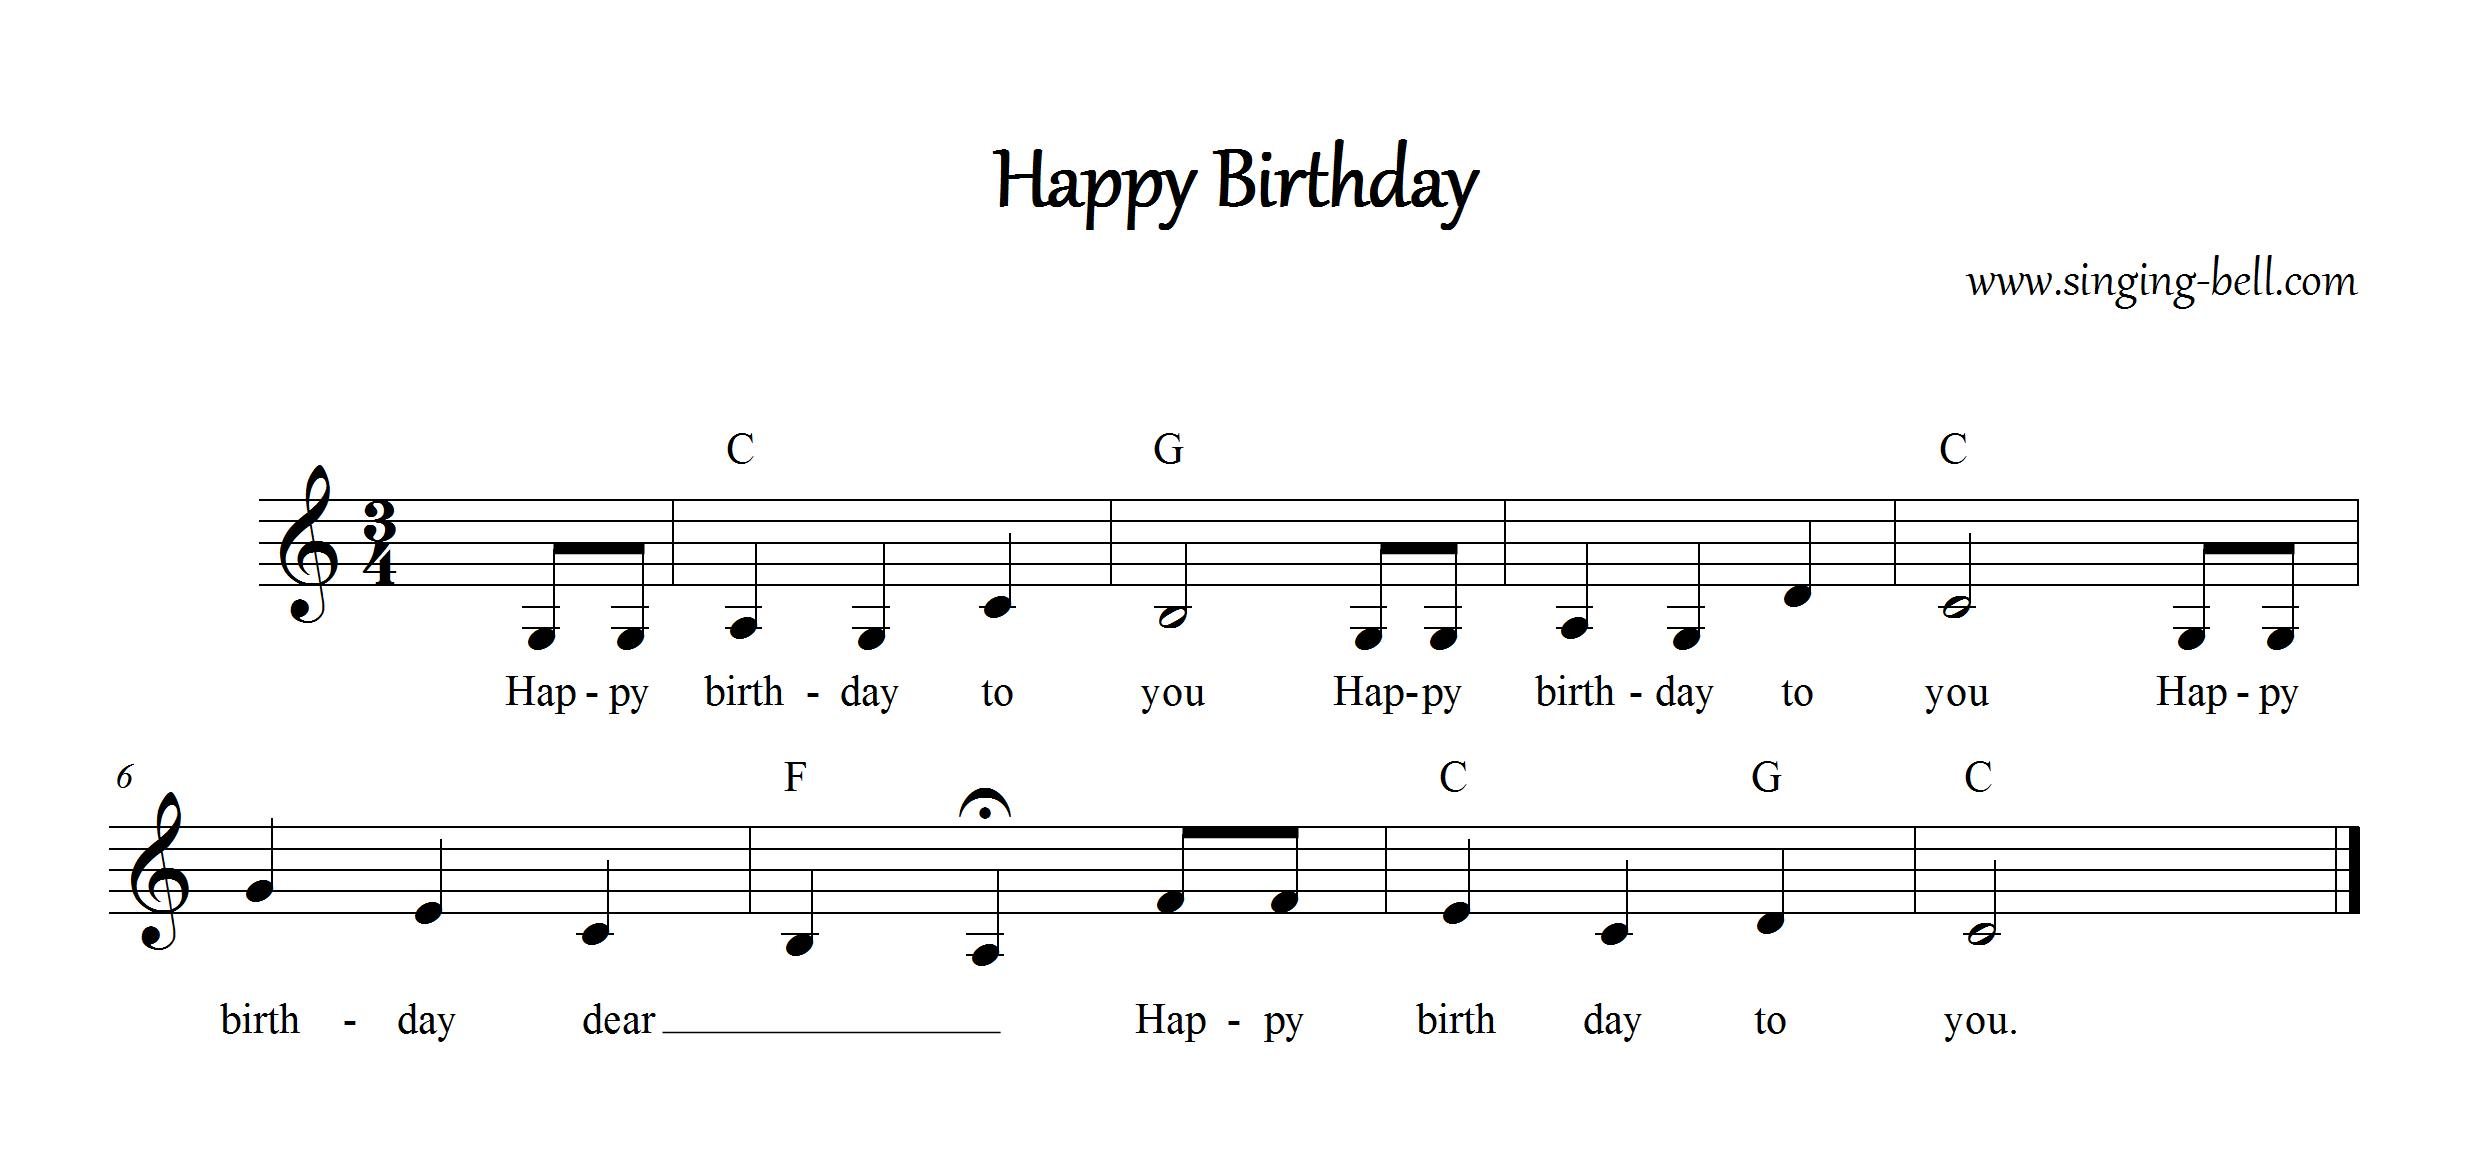 Happy Birthday Chords Happy Birthday To You 7 Free Karaoke Versions To Download